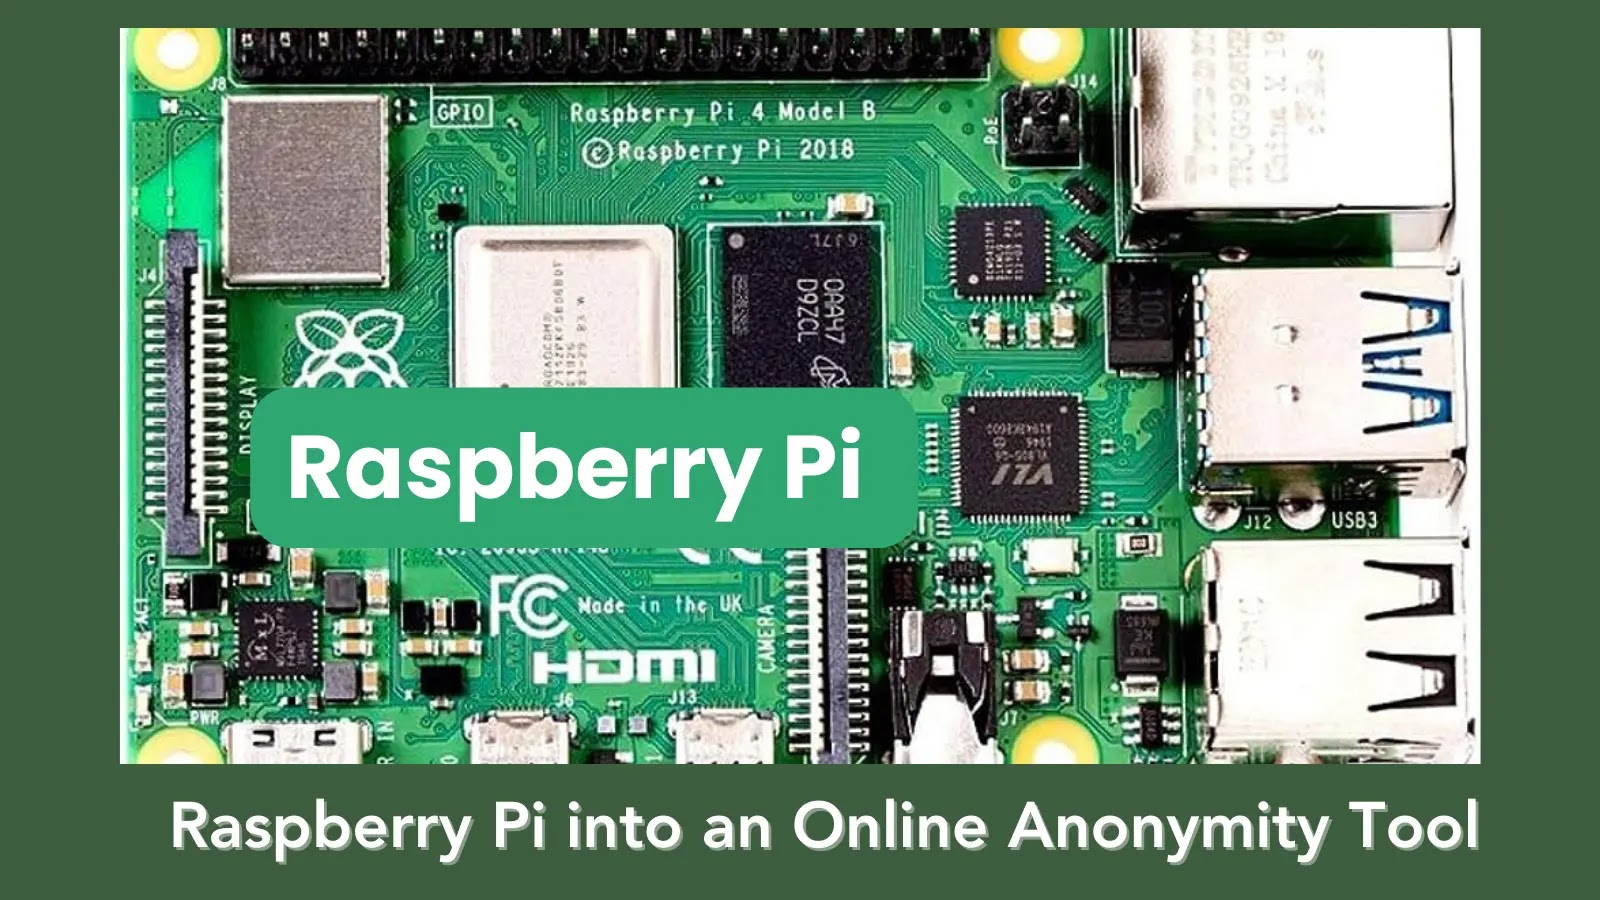 alt=A Raspberry Pi transformed into an online anonymity tool, enhancing privacy and security.